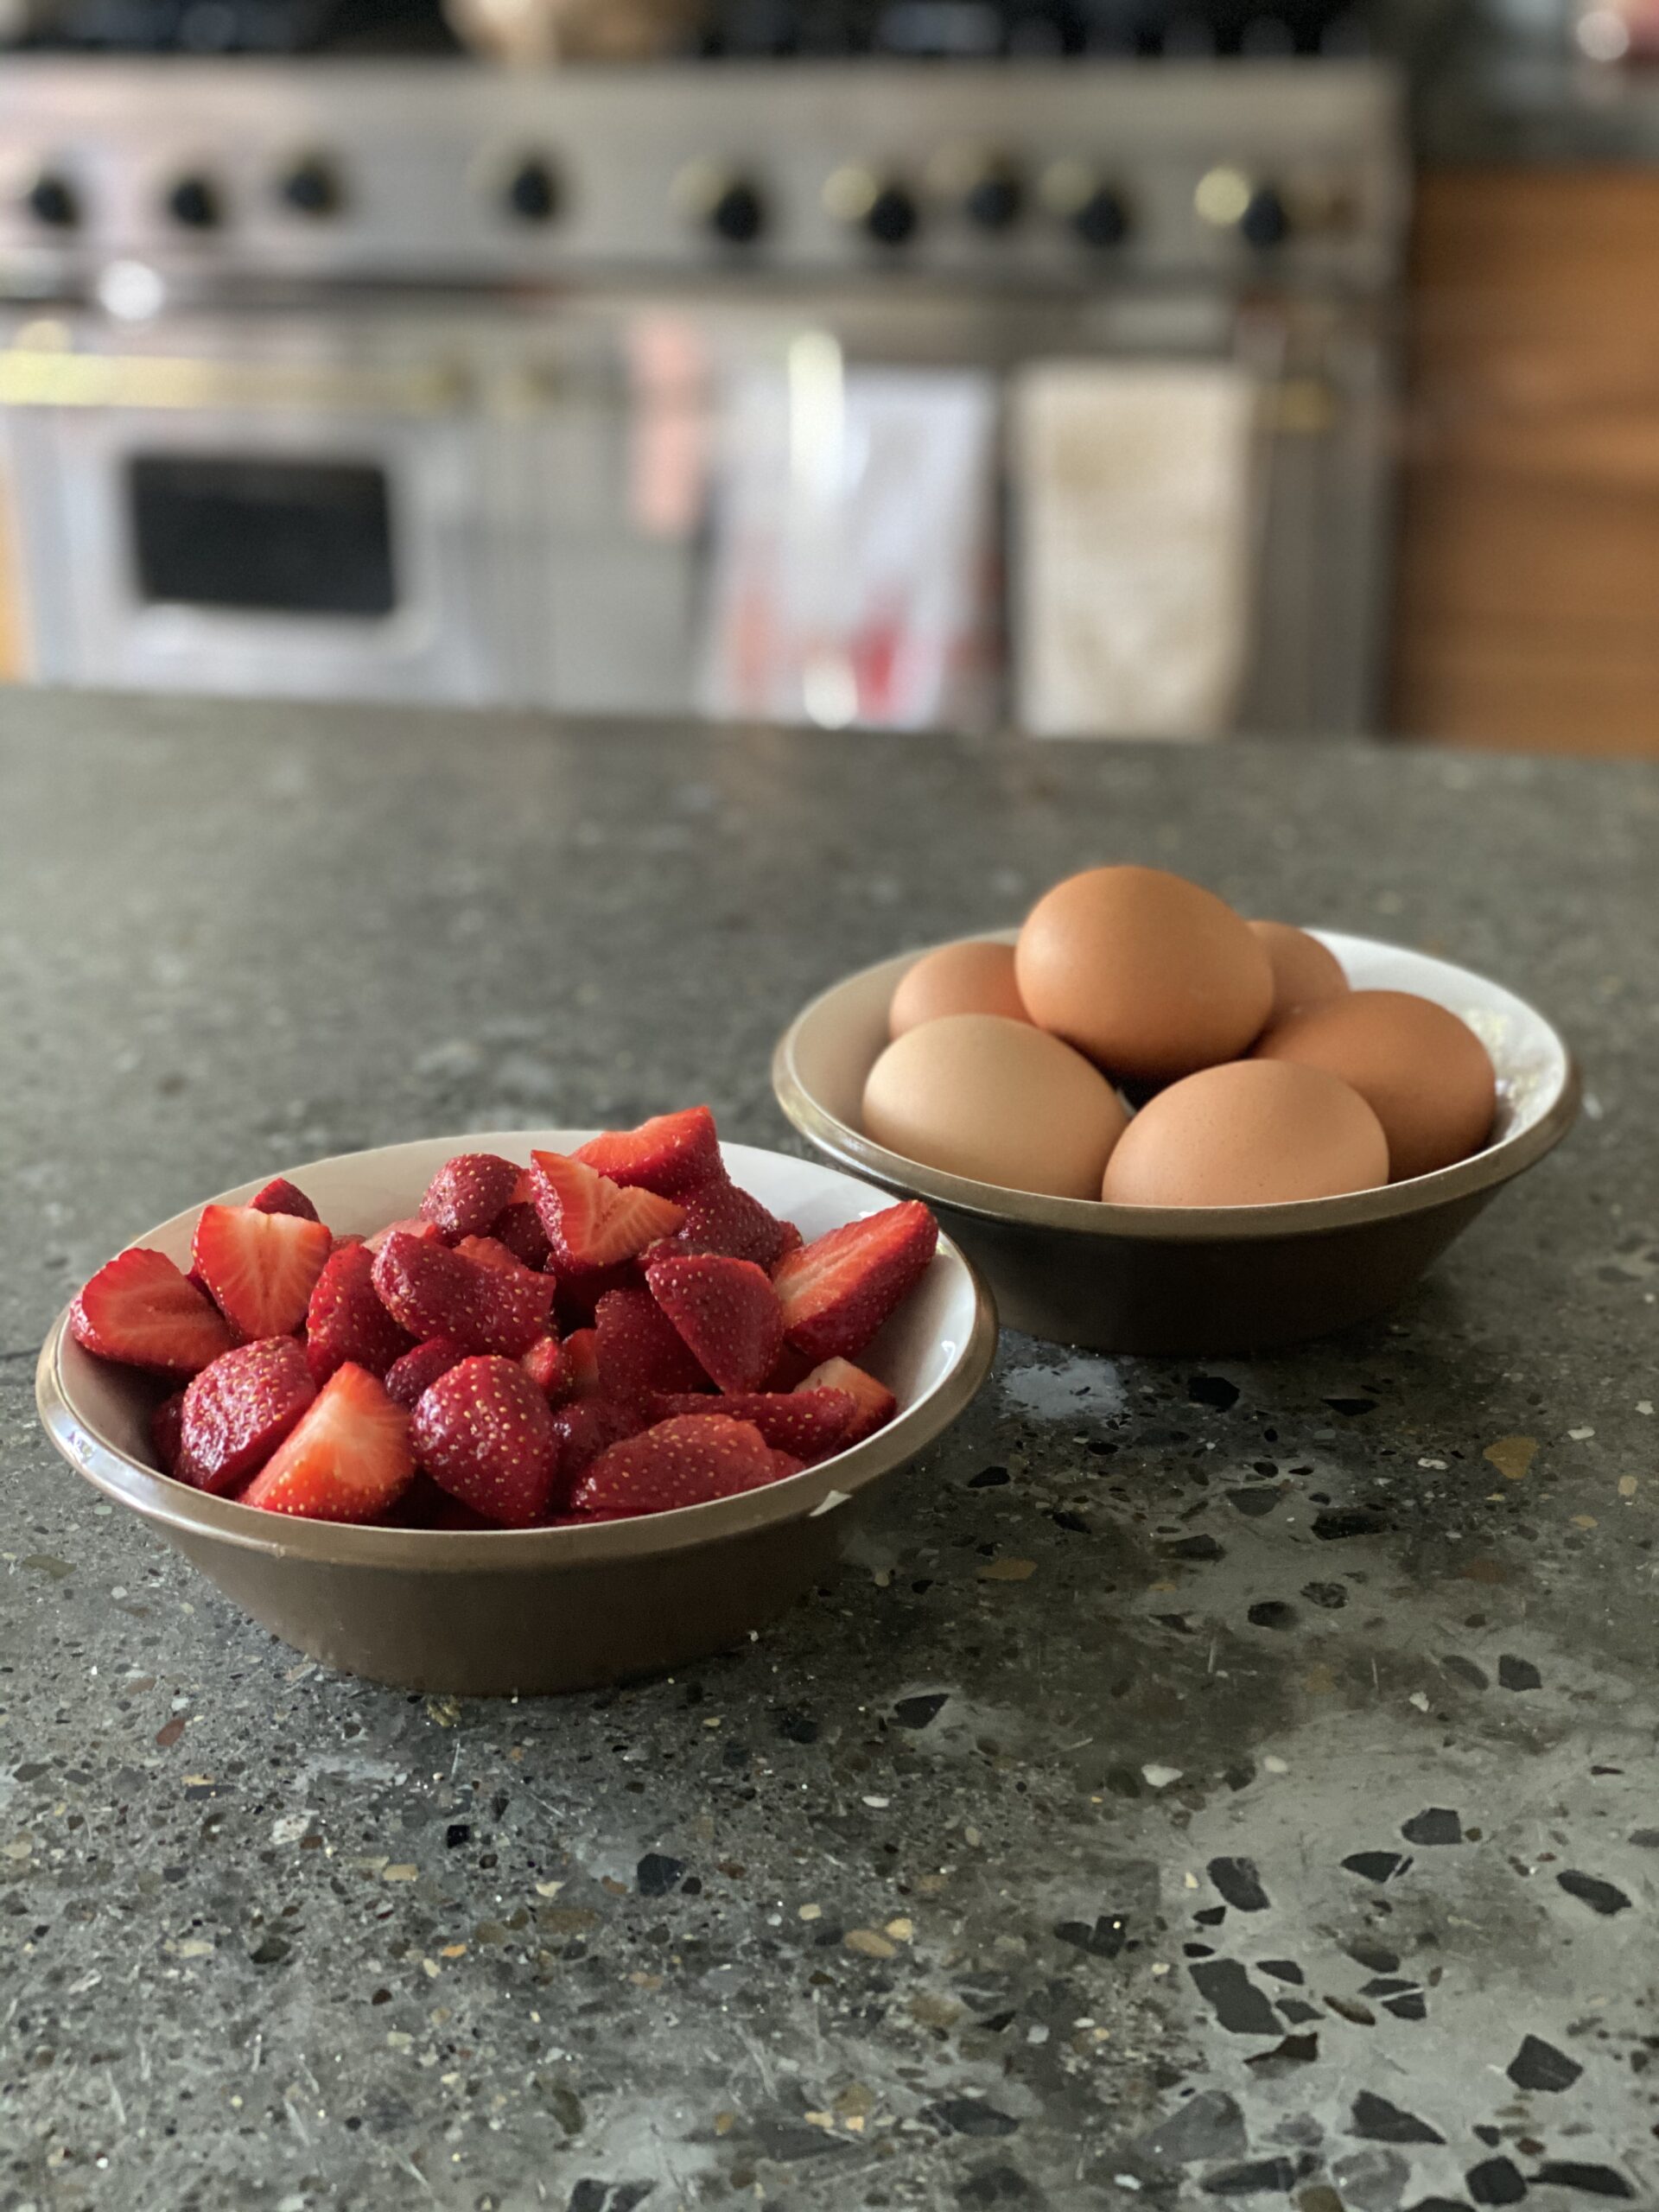 Easy Breakfast Ideas Kids Can Make Themselves | Didn't I Just Feed You podcast